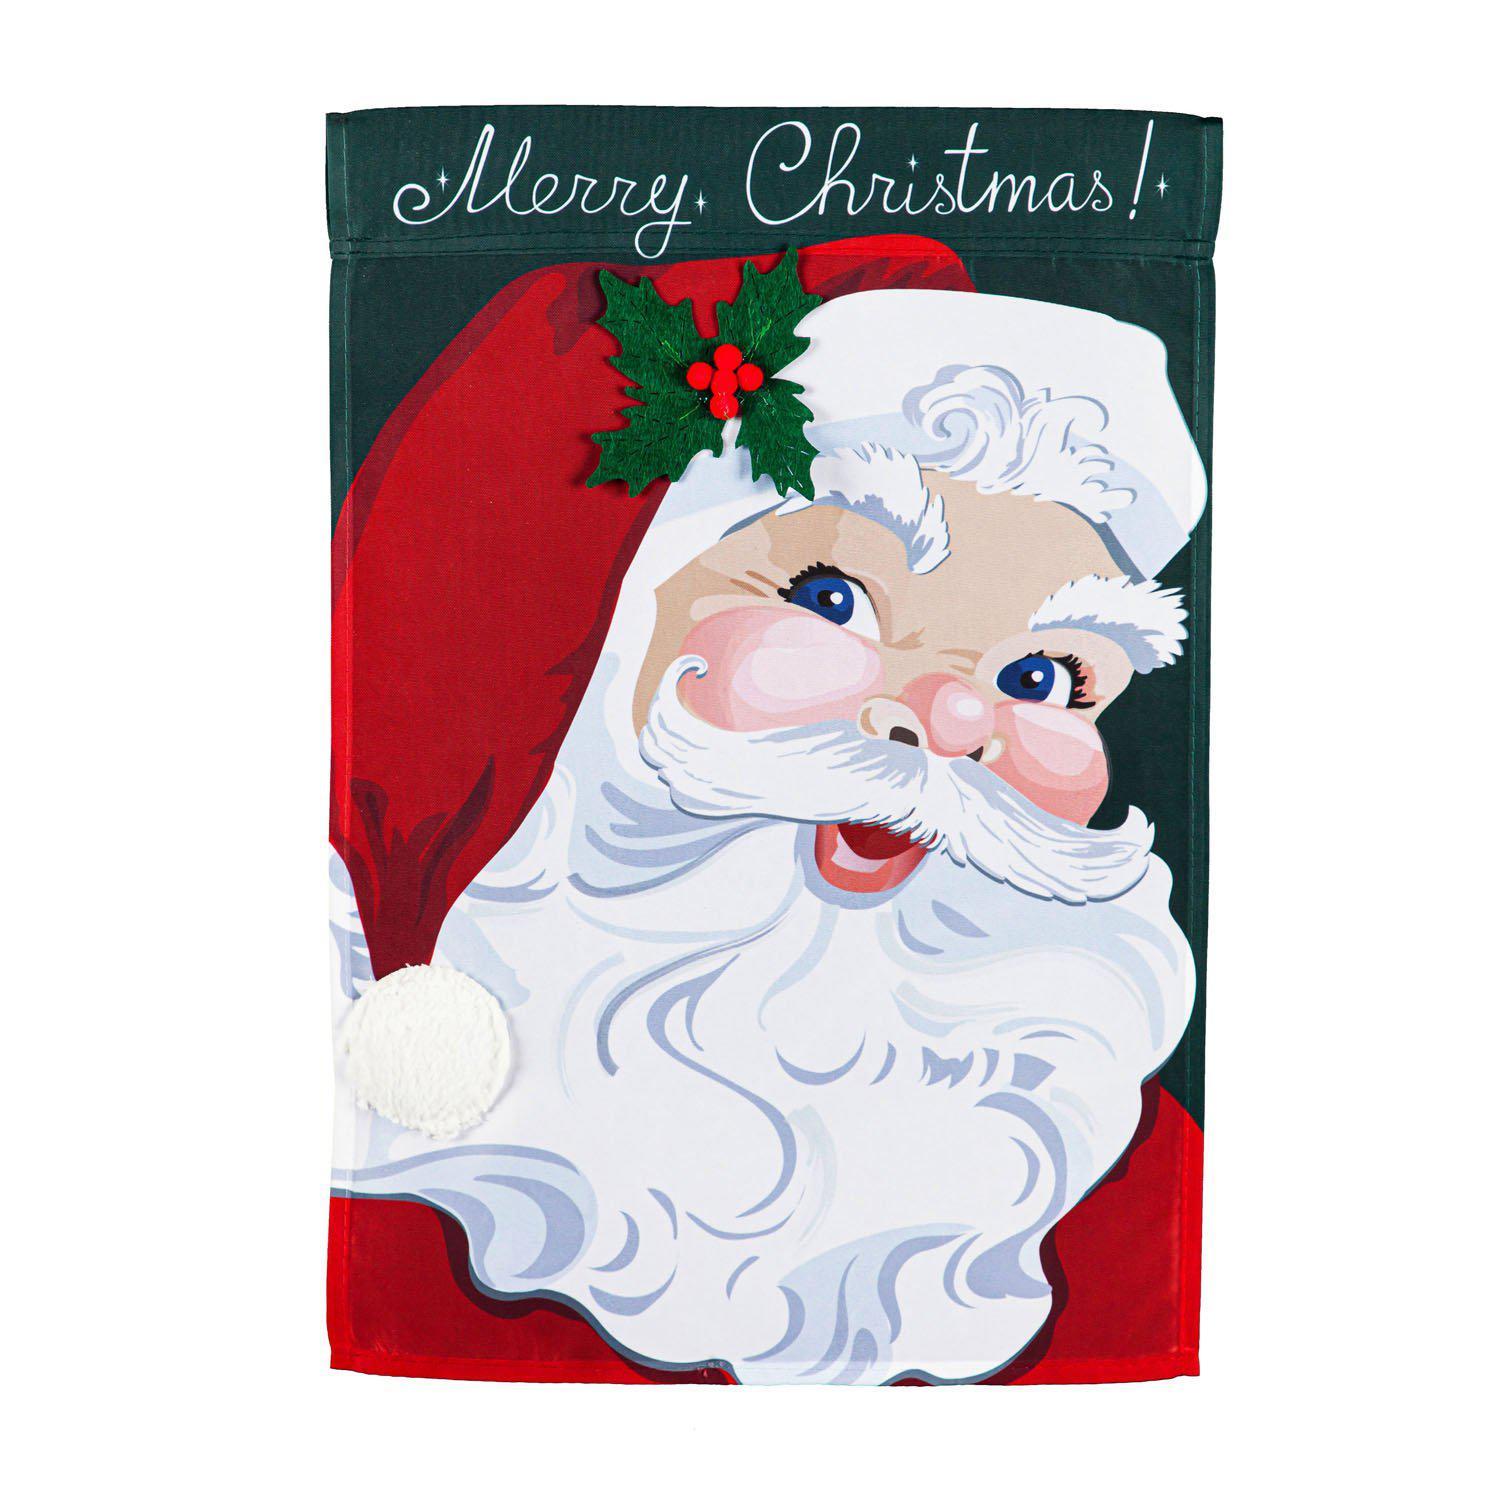 The Vintage Santa house banner features a jolly Santa and the words "Merry Christmas!".